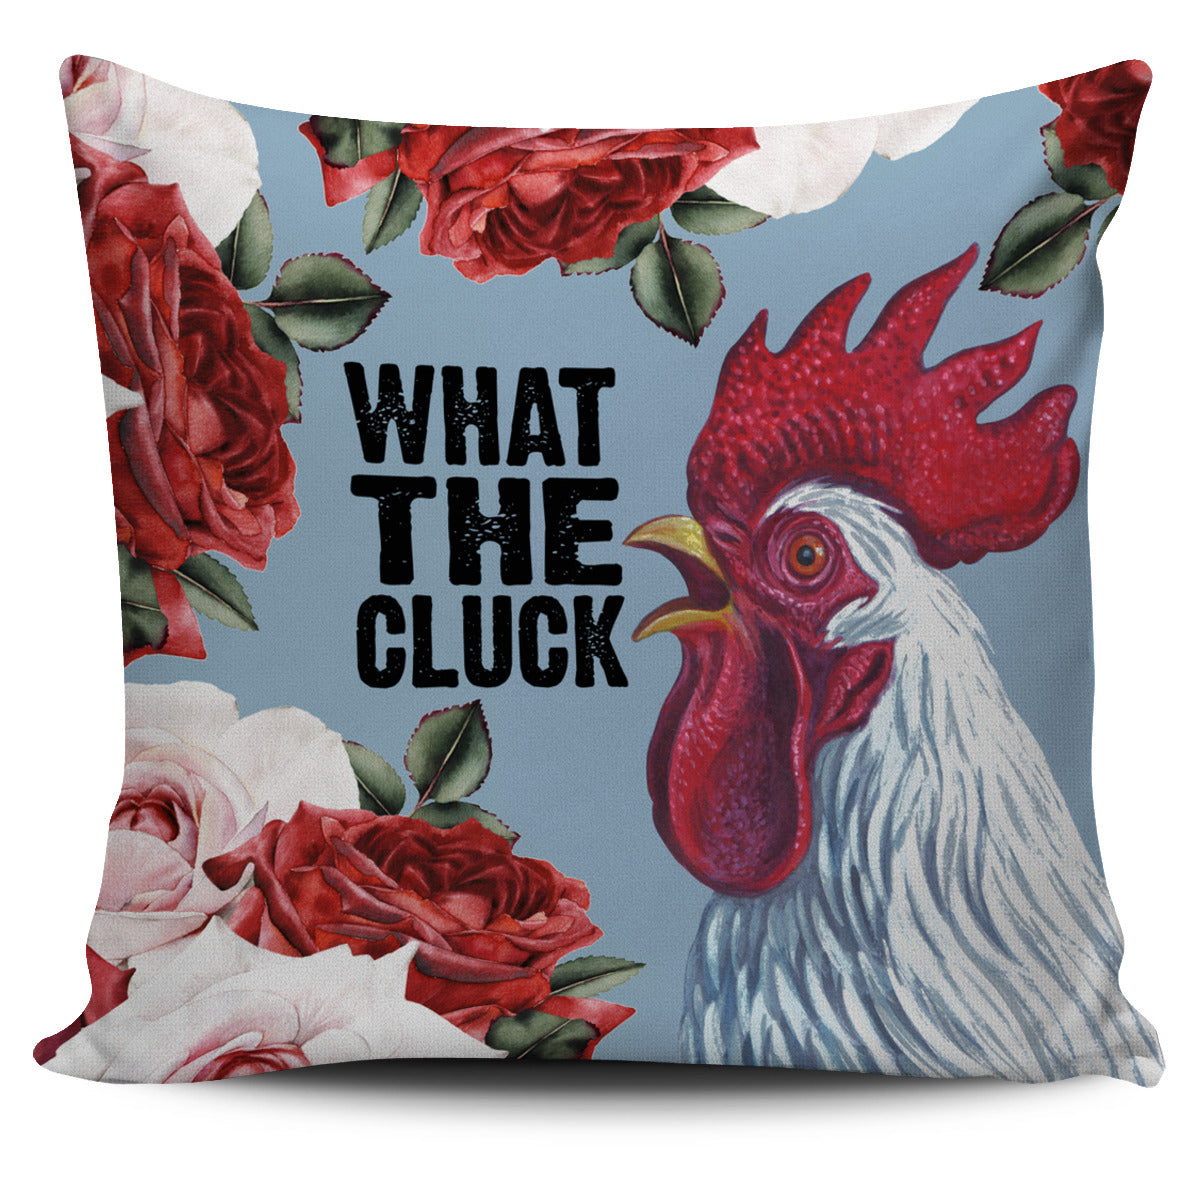 What The Cluck Pillow Cover